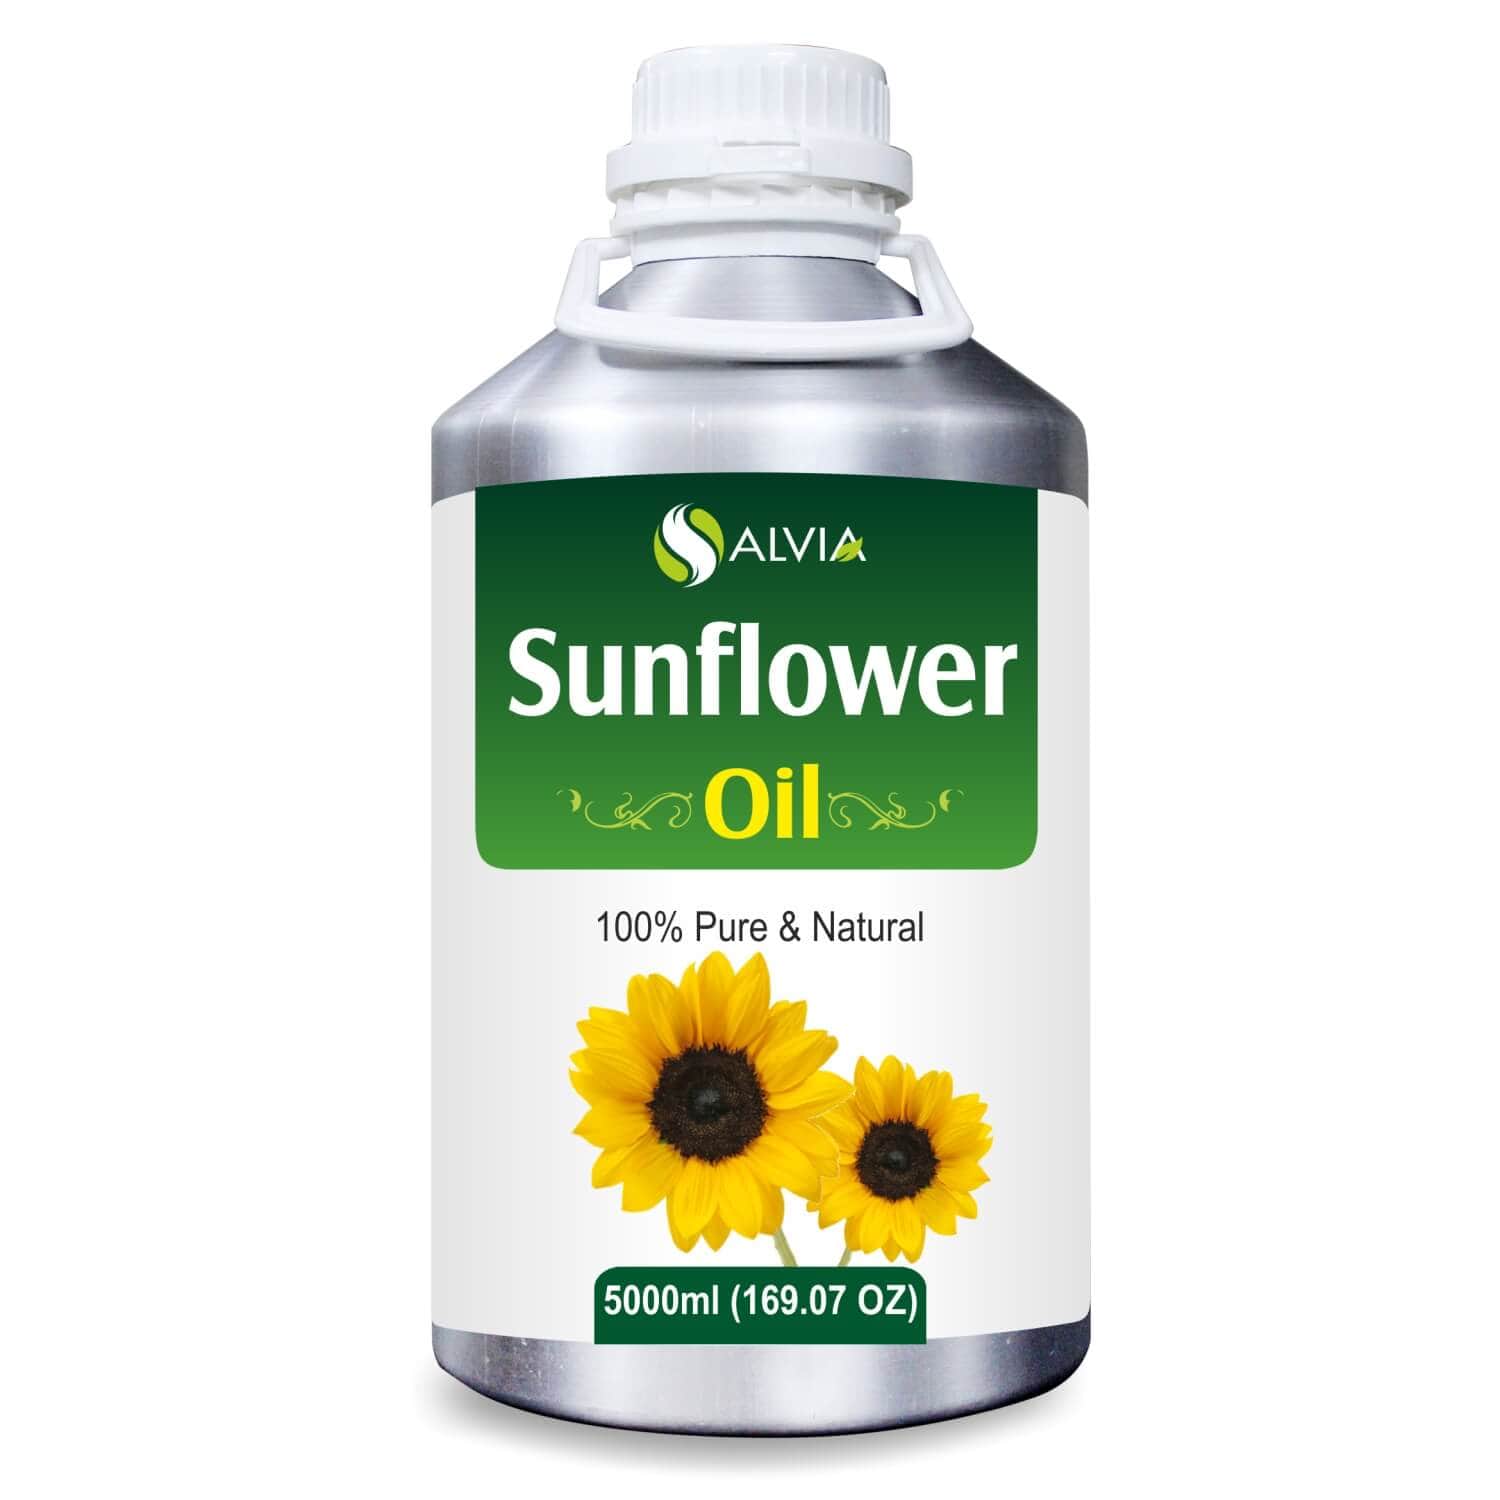 Salvia Natural Carrier Oils 5000ml Sunflower Oil (Helianthus-Annuus) 100% Natural Pure Carrier Oil Prevents Moisture Loss, Delays Aging, Tones The Skin, Hydrates & Strengthens Hair & More